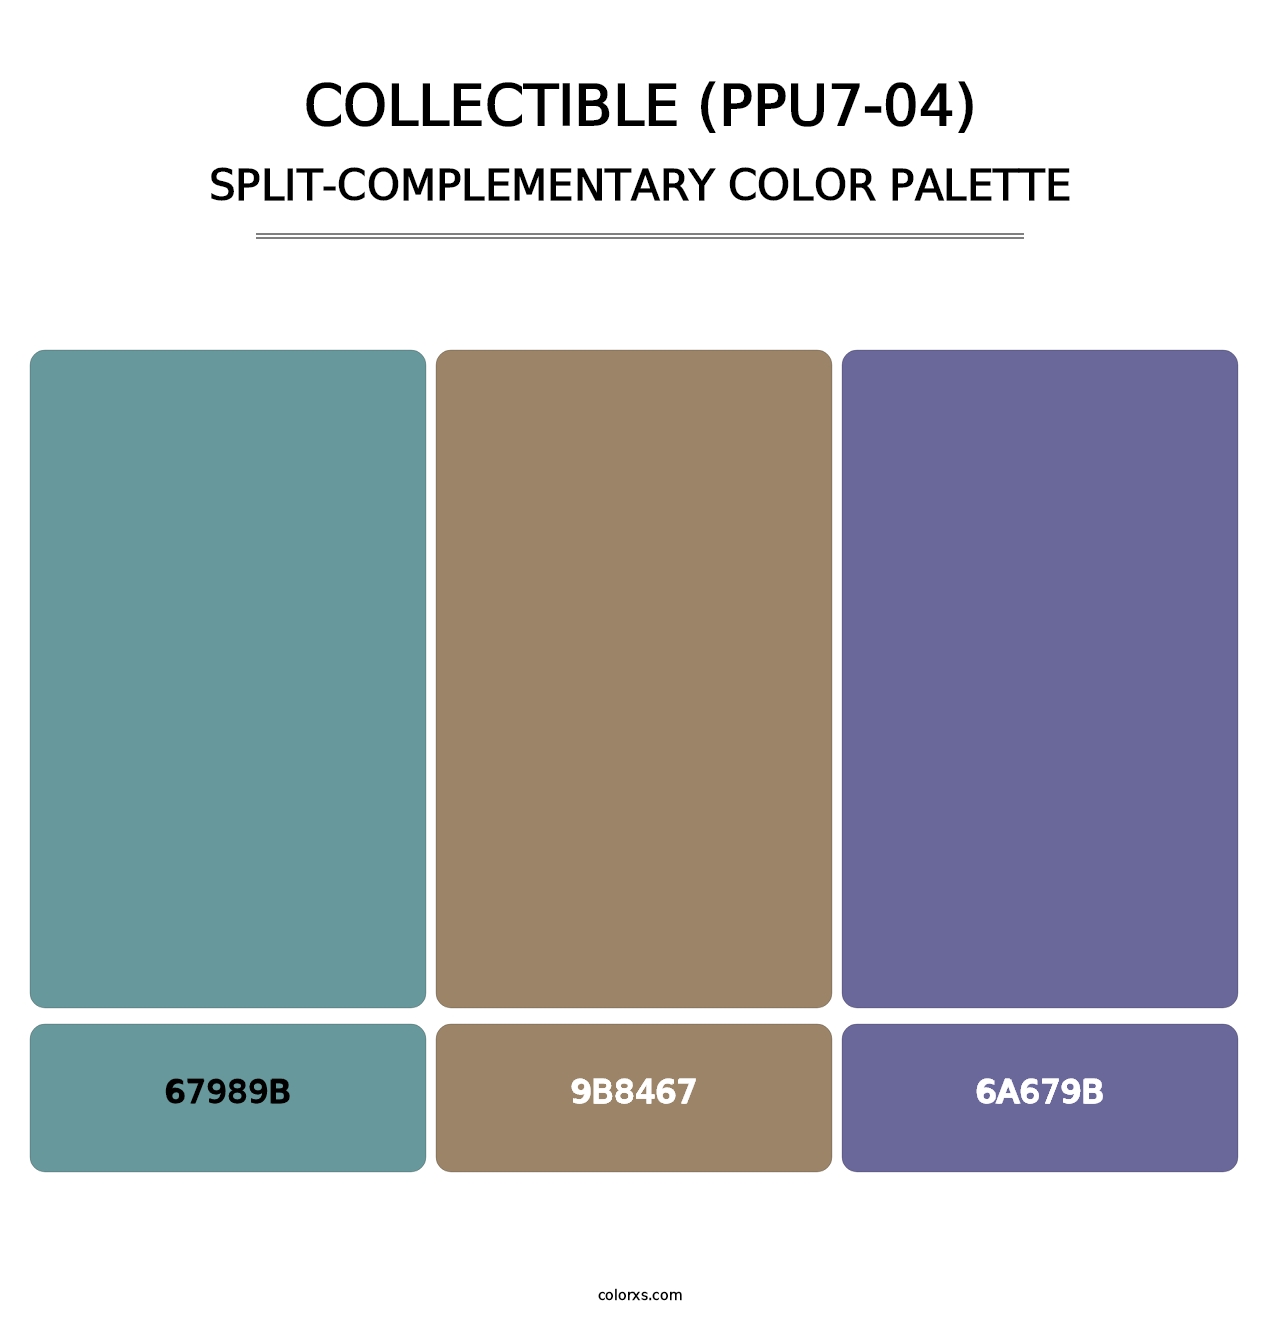 Collectible (PPU7-04) - Split-Complementary Color Palette